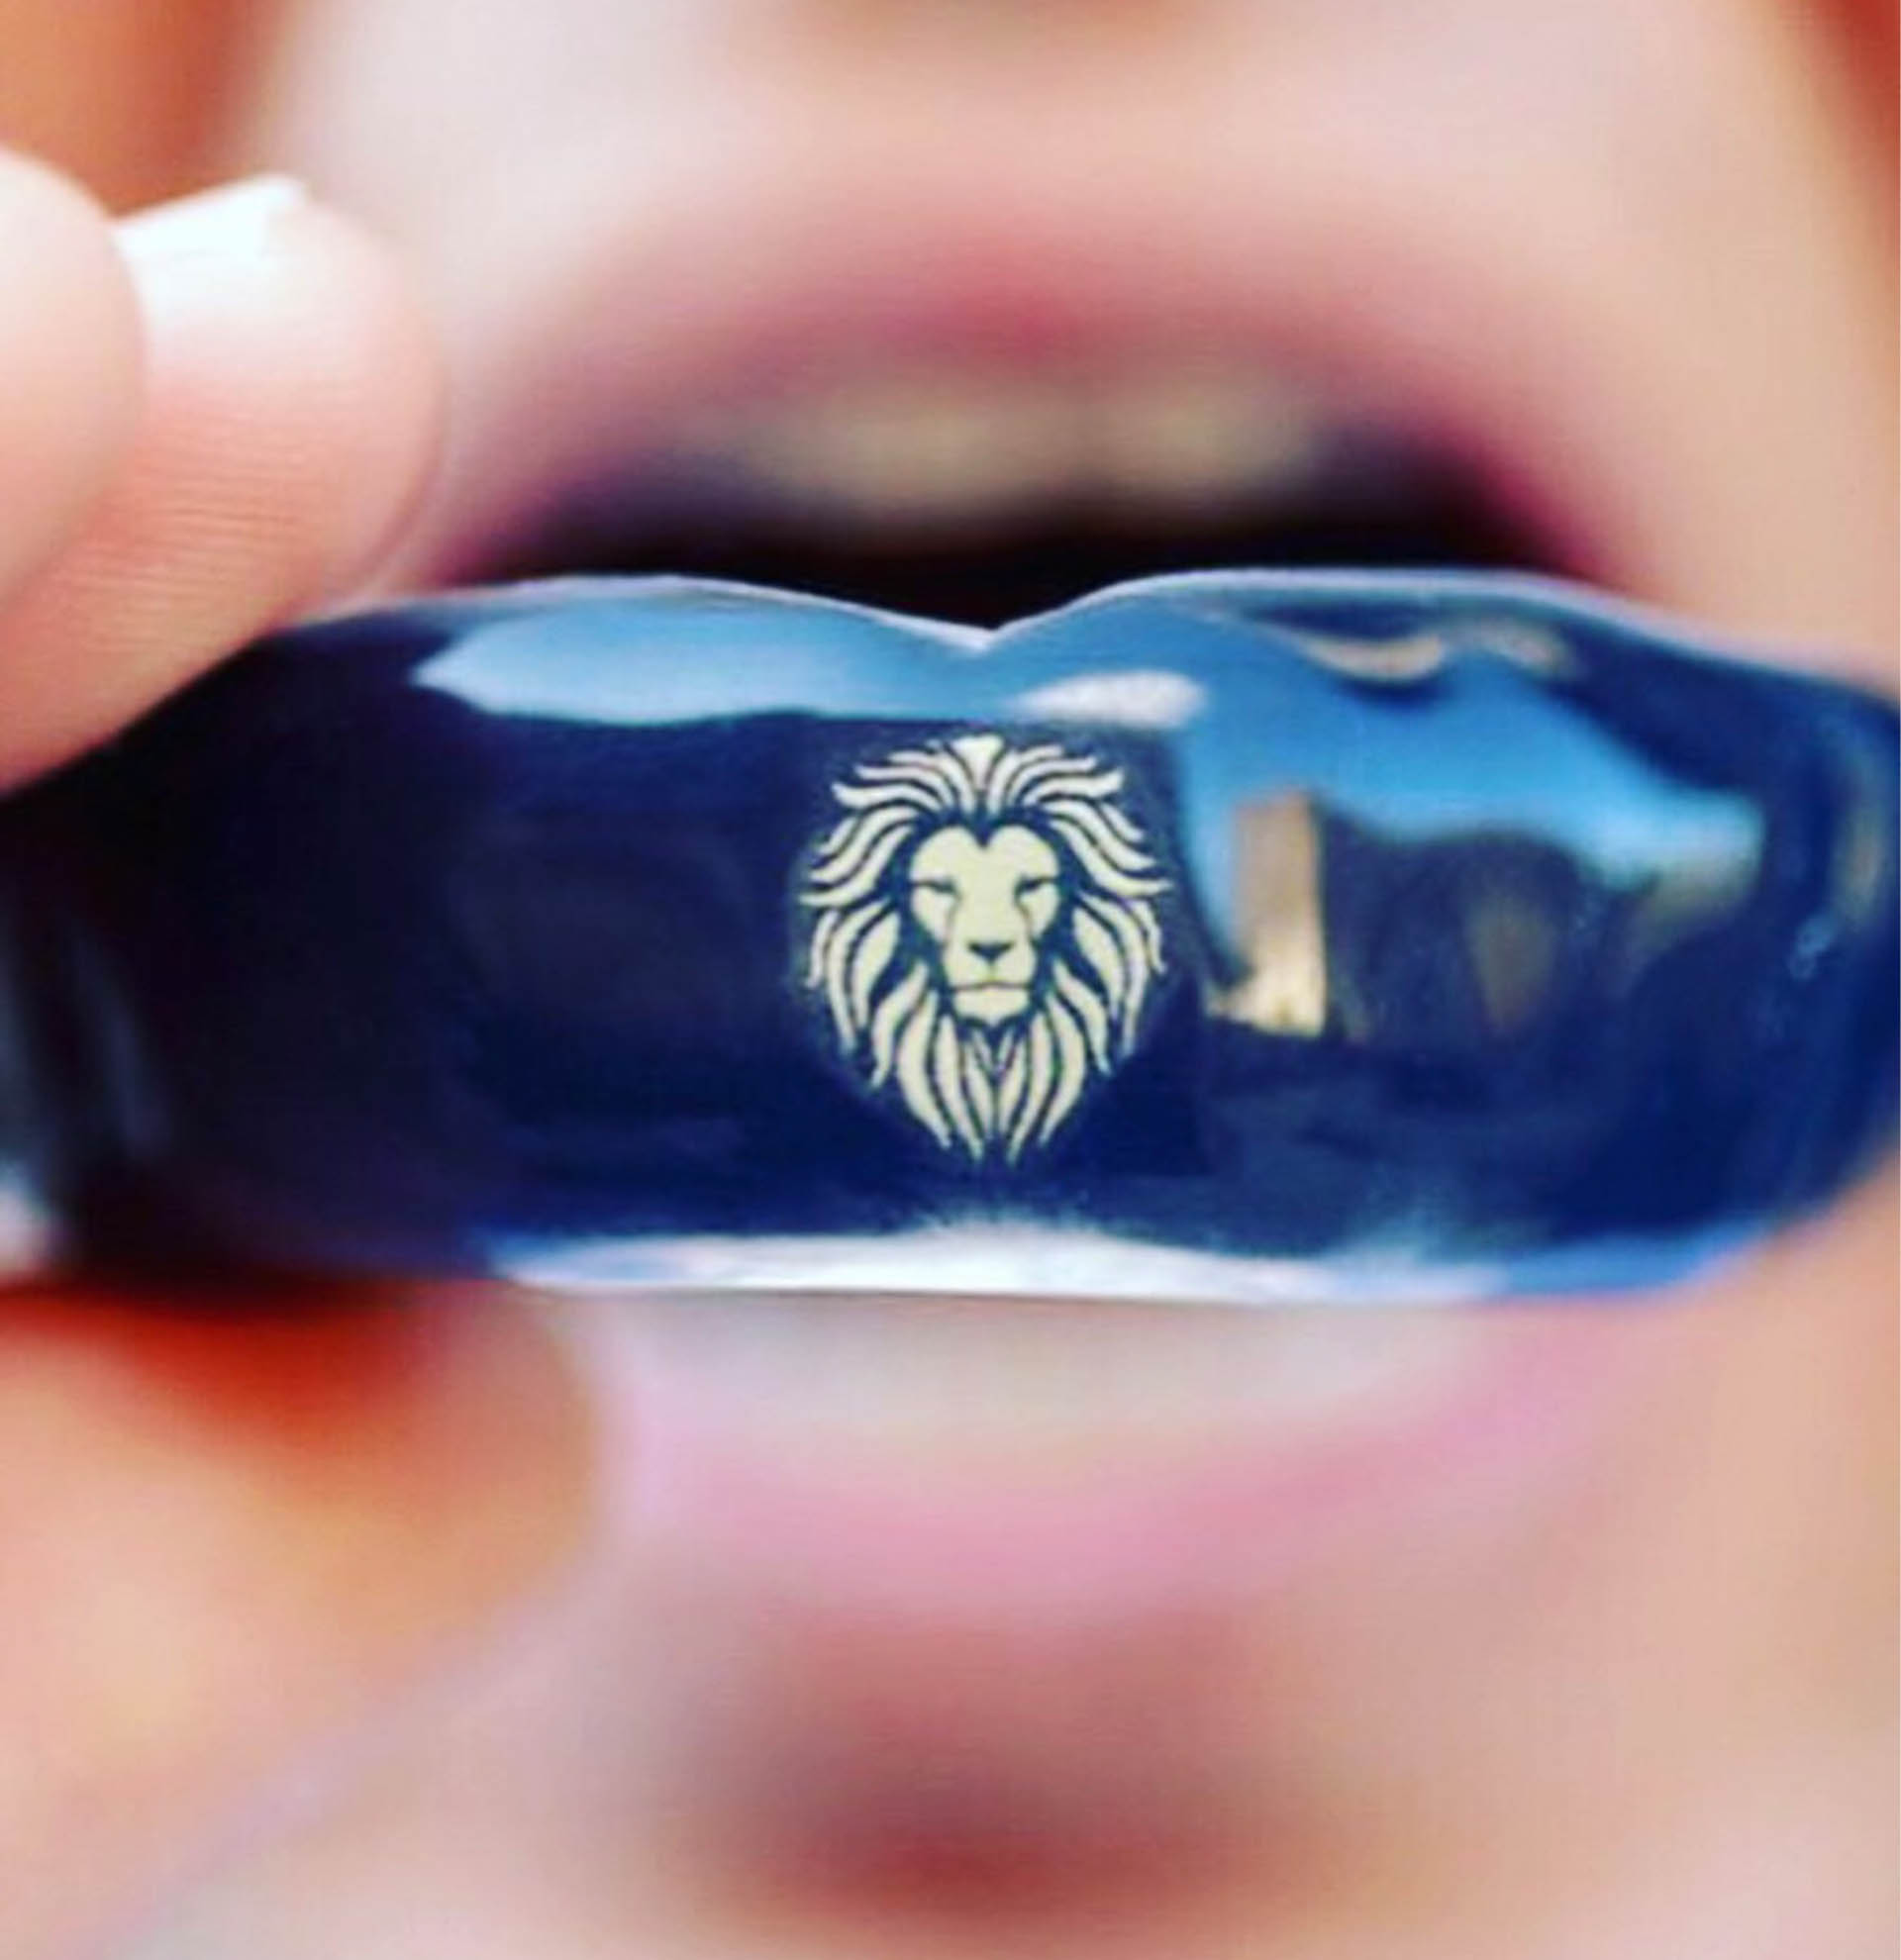 A man wearning blue mouth guard with lion sign on the middle.